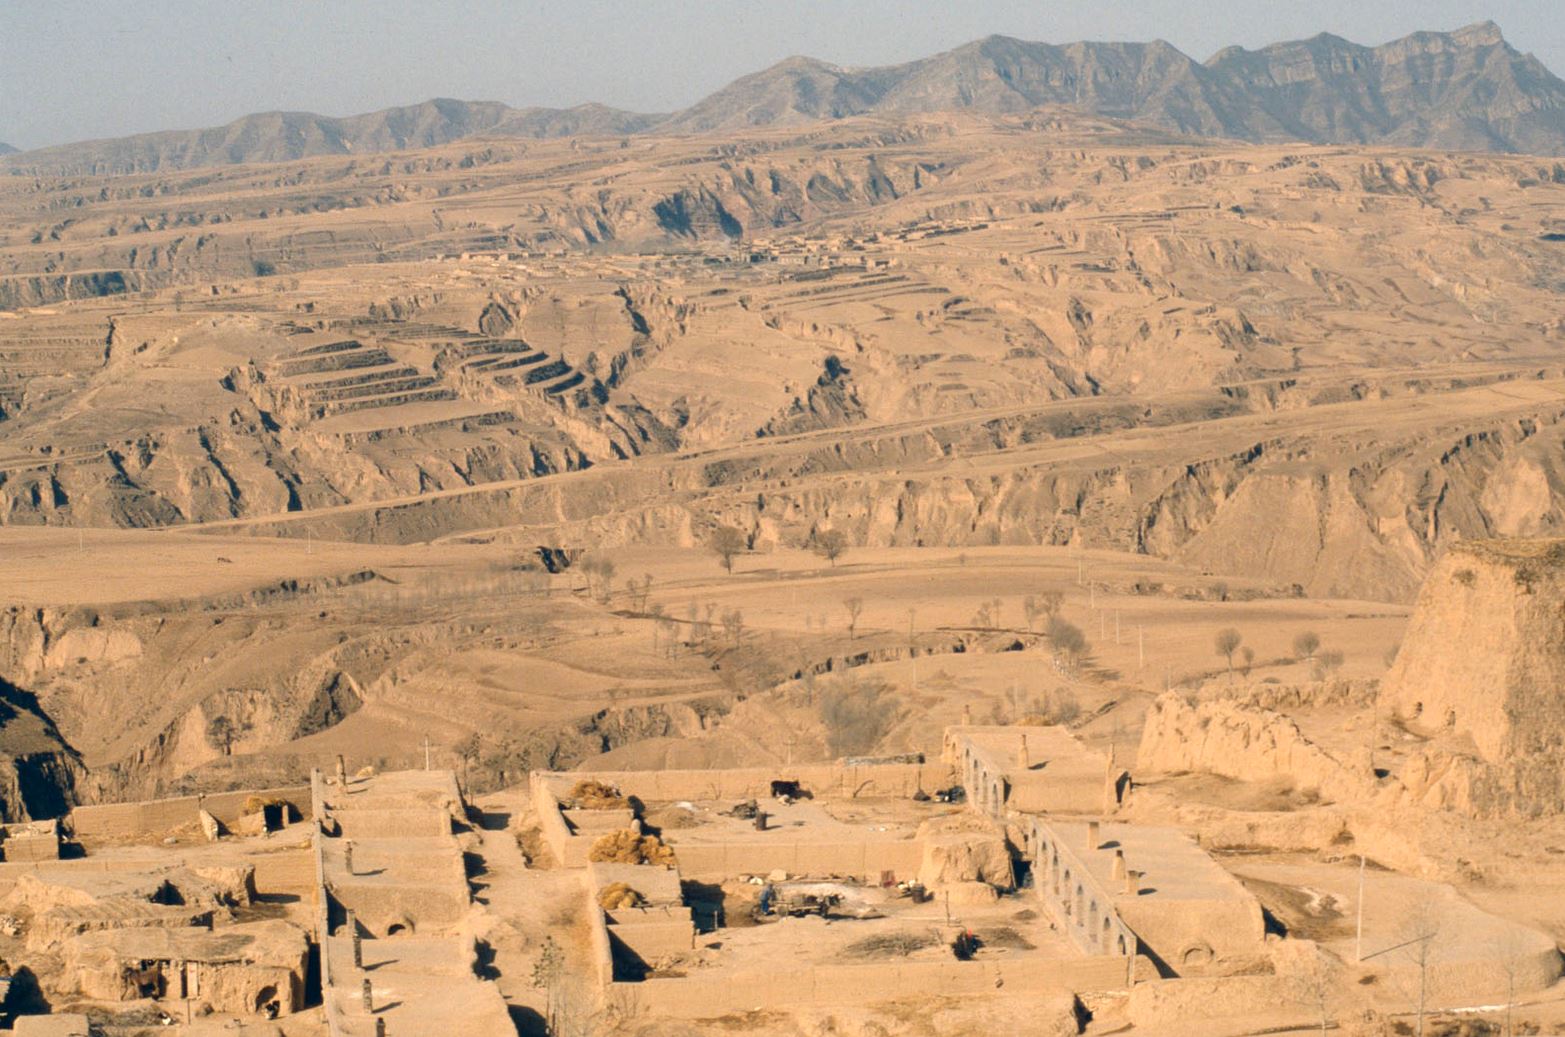 Tan landscape of plateaus and canyons with buildings carved into the stone.